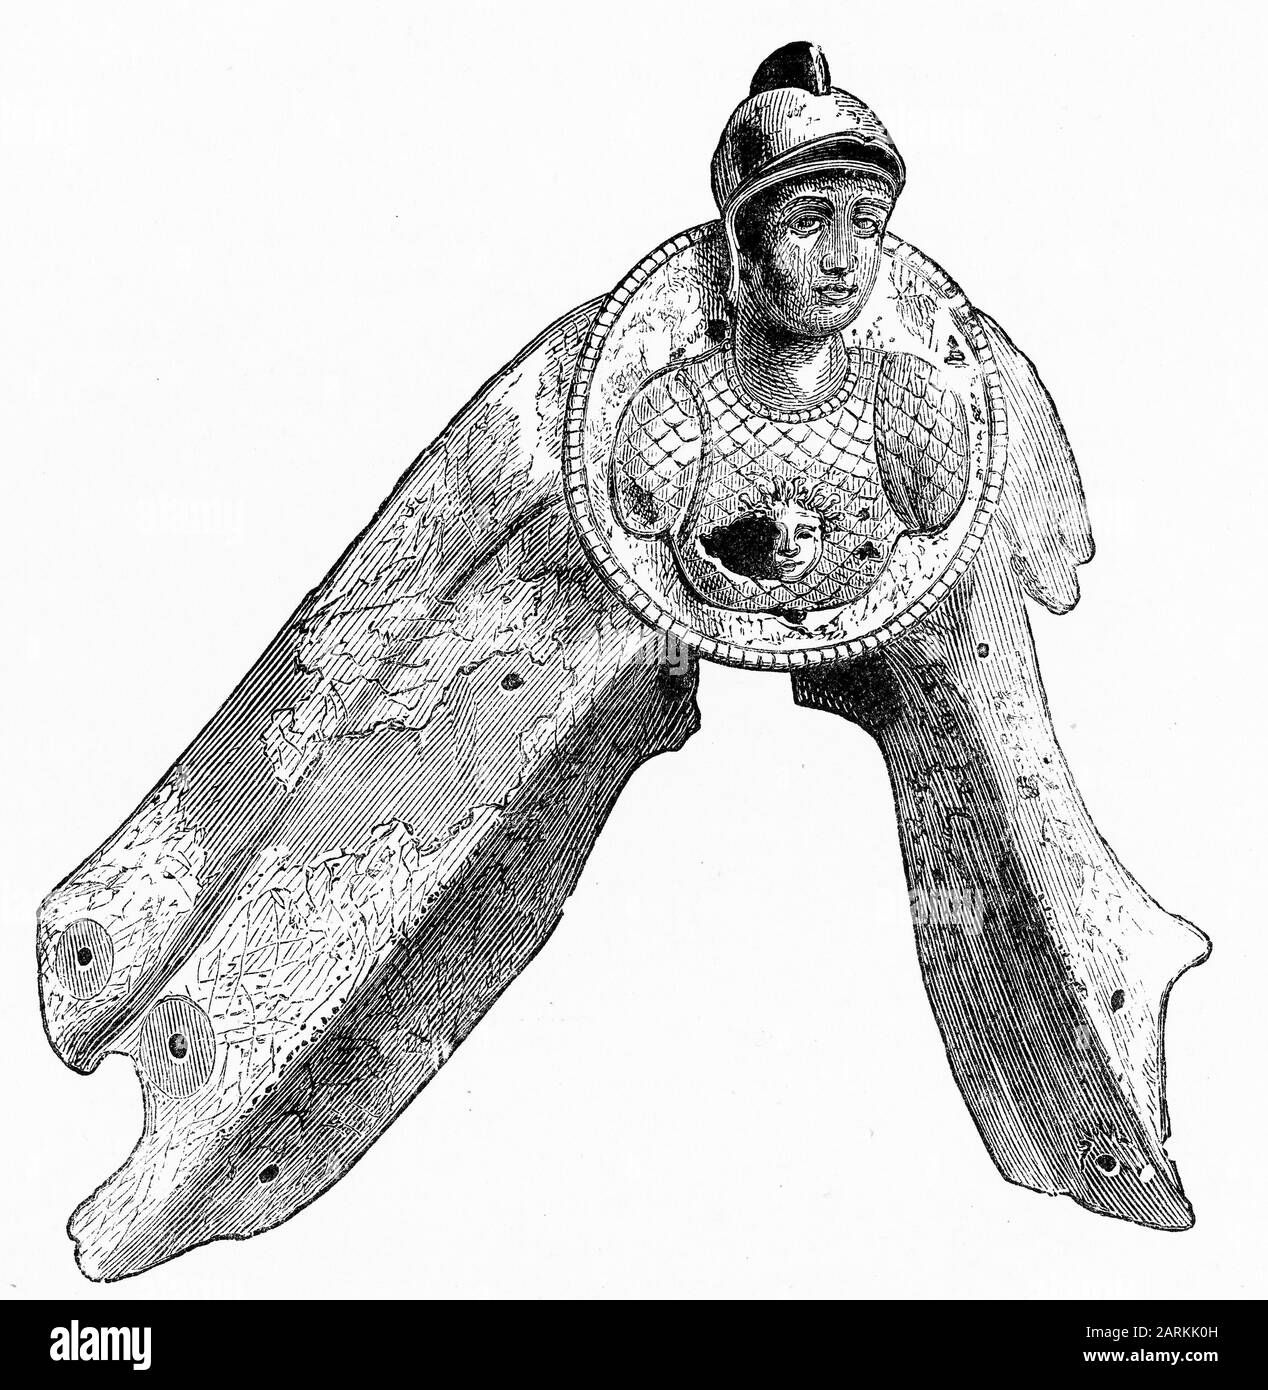 Engraving of the figurehead of the Roman galley Minerva, which fought in the battle of Actium, fought between the fleet of Octavian and the combined forces of Mark Antony and Queen Cleopatra of Egypt on 2 September 31 BC in the Ionian Sea near the promontory of Actium in Greece. Stock Photo